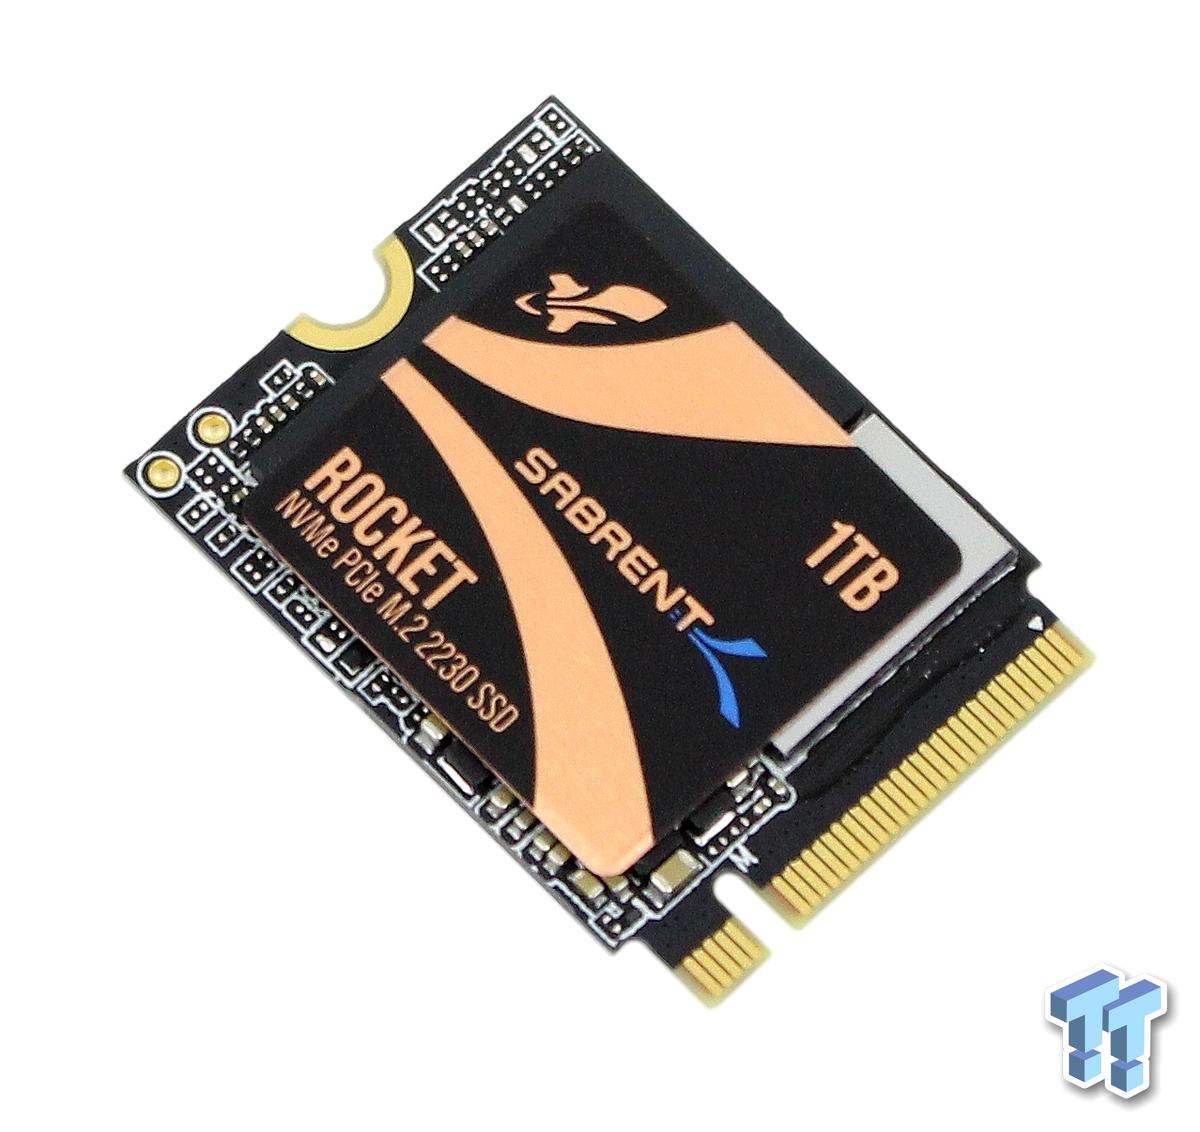 Sabrent Rocket 2230: A Small Form Factor NVMe SSD with Impressive  Performance 